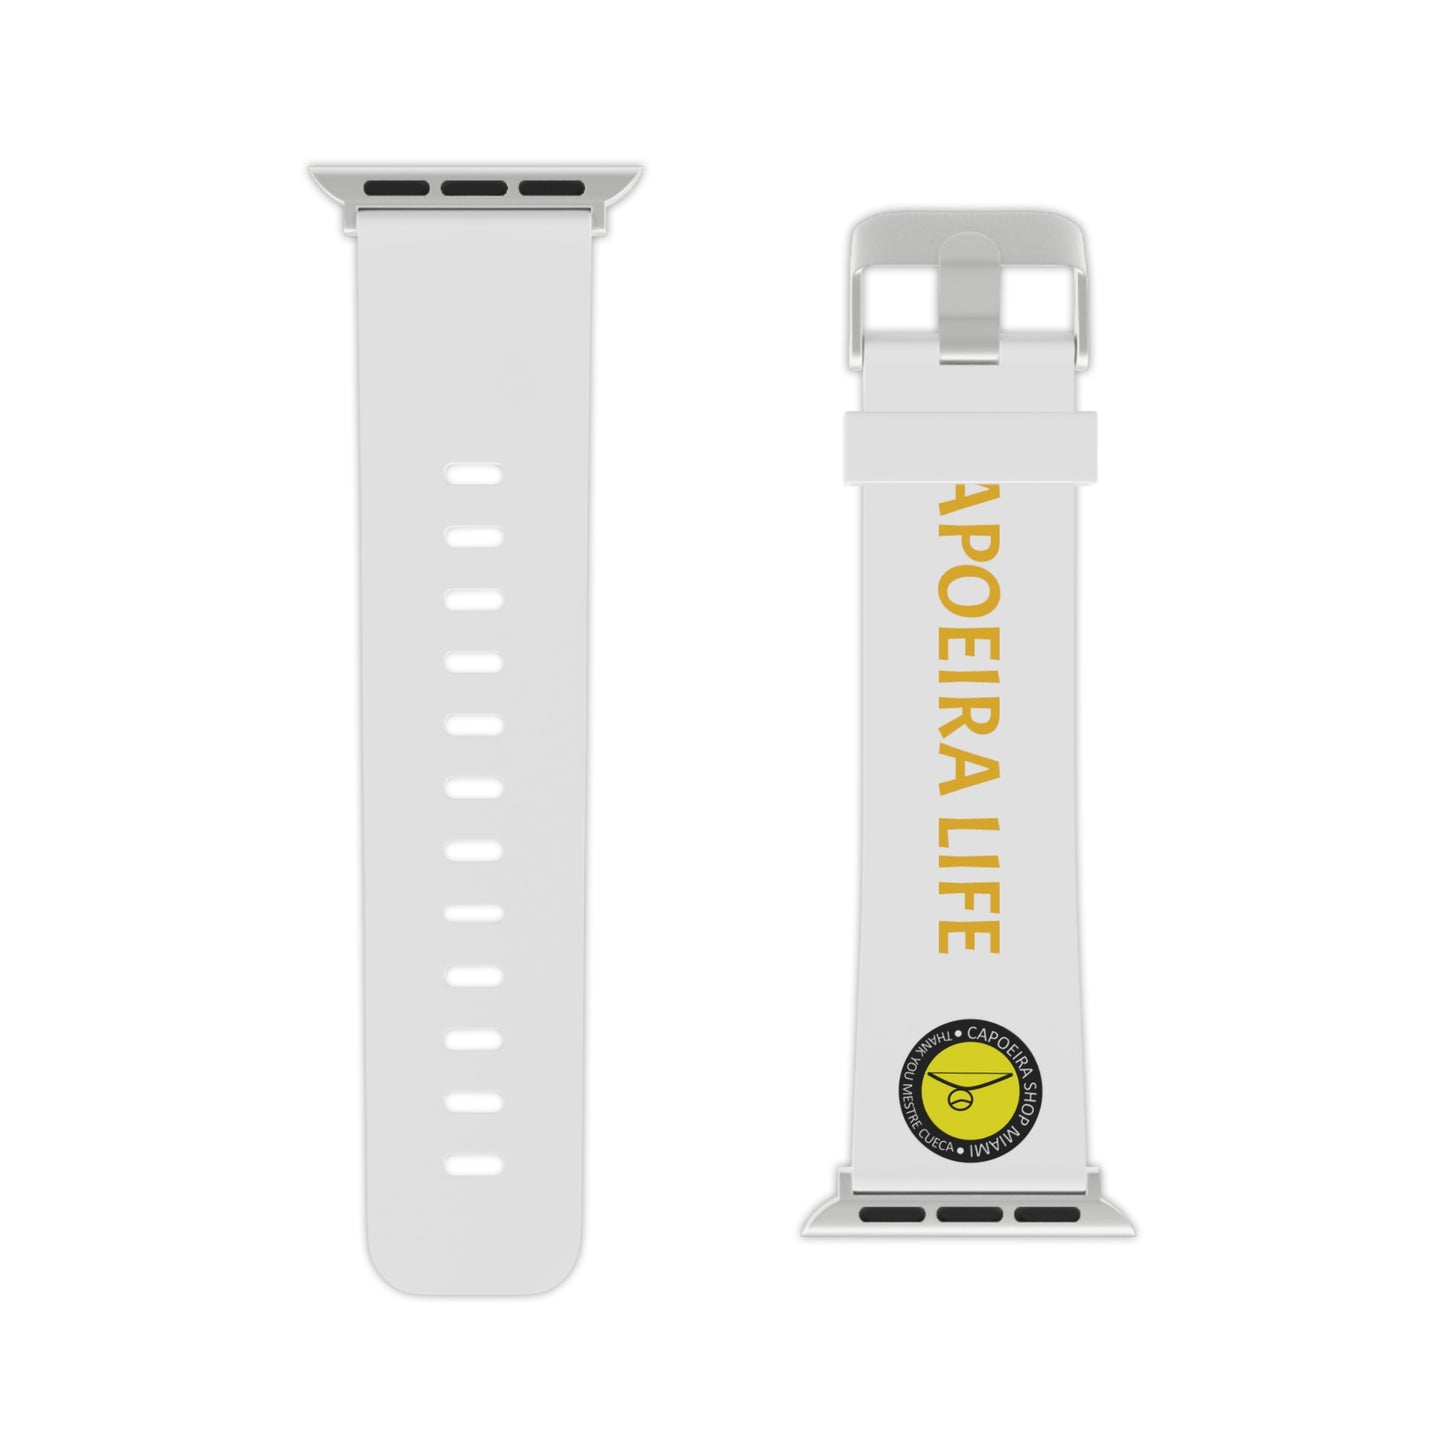 Watch Band for Apple Watch with capoeira text